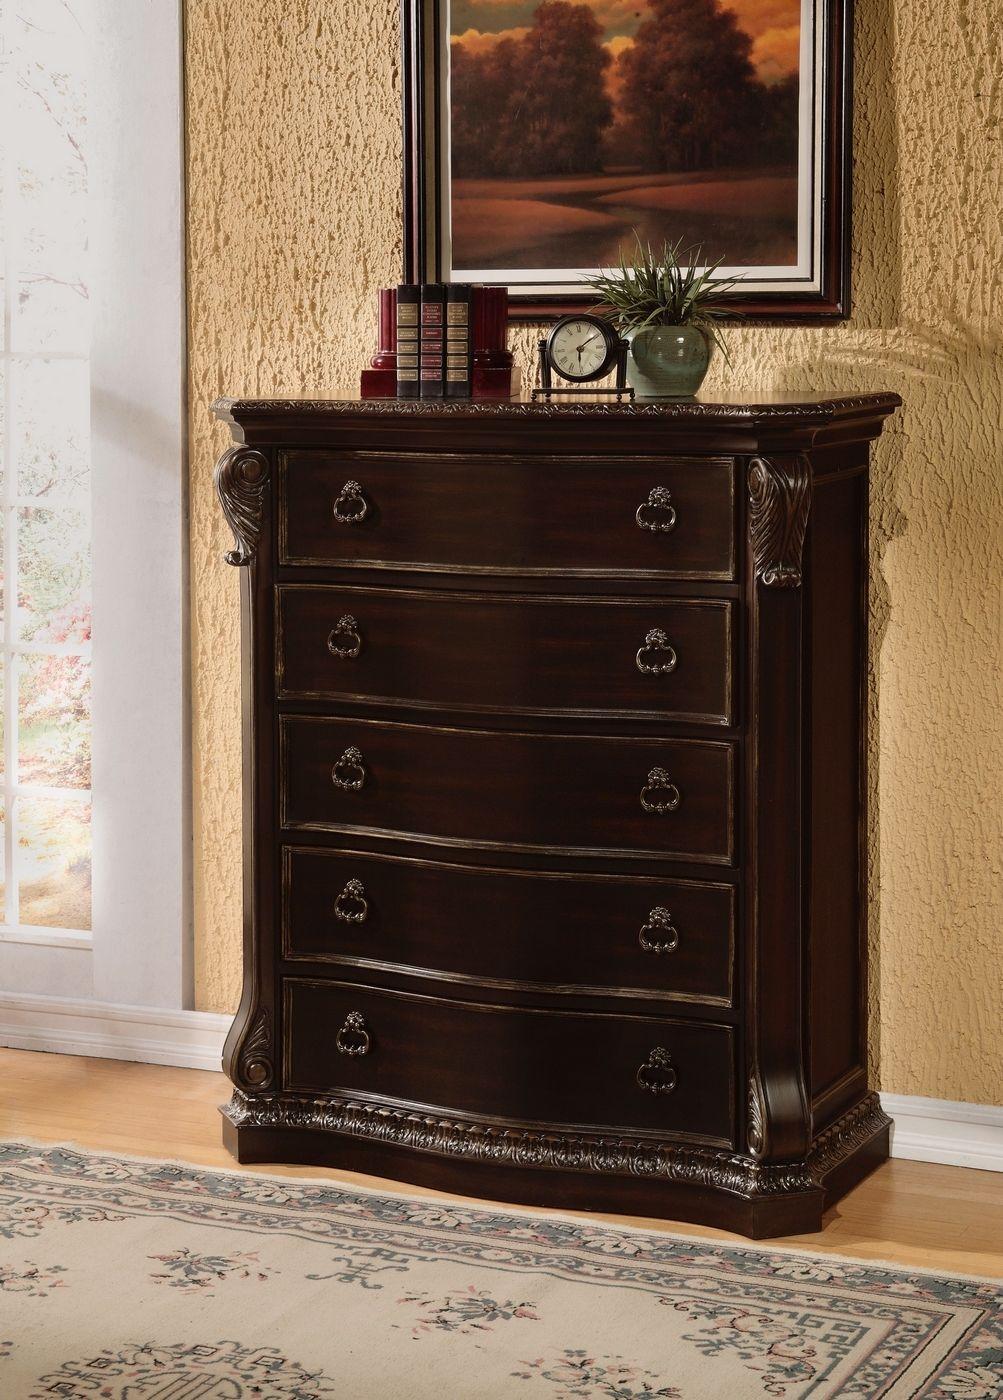 

    
McFerran B5188-C Ebony Finish Gold Accents Gothic 5-Drawer Chest Carved Wood
